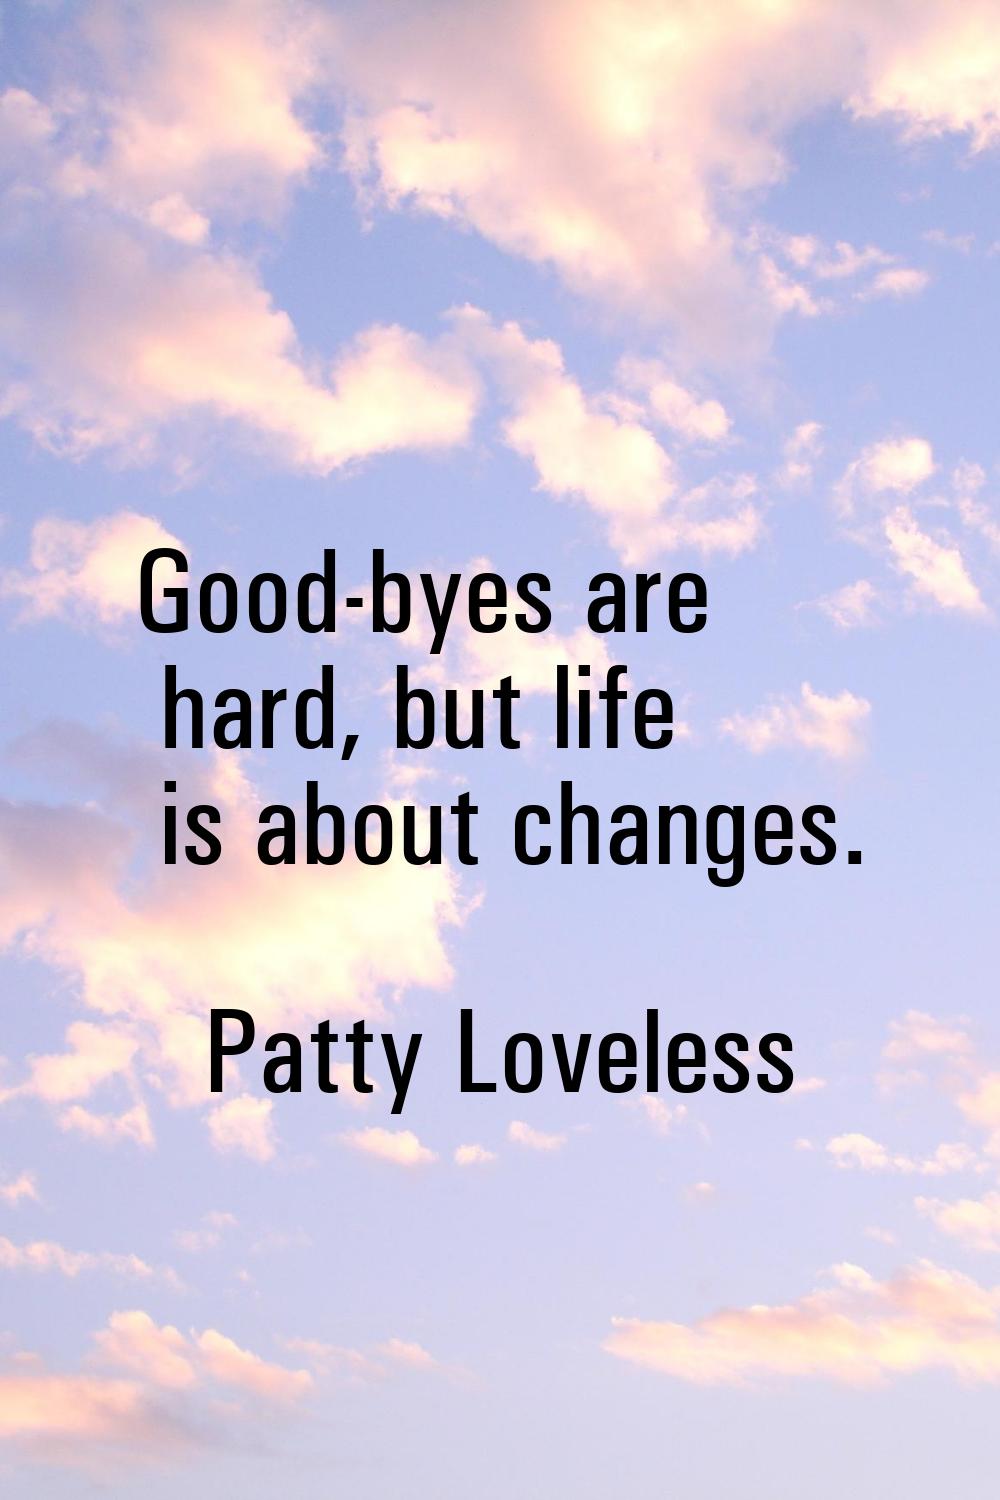 Good-byes are hard, but life is about changes.